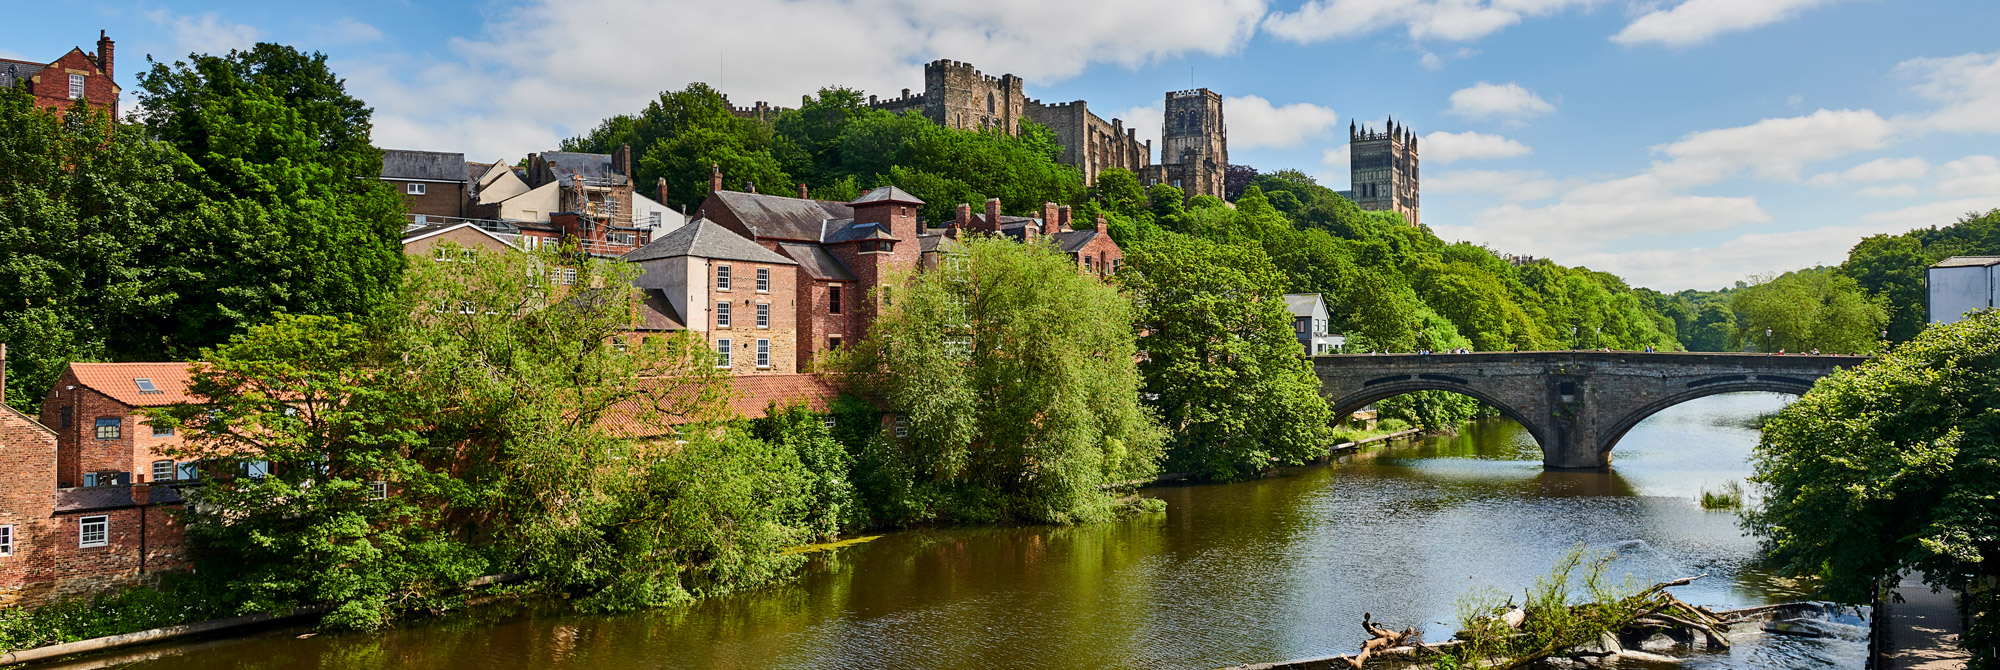 Photograph of Durham Cathedral and Castle high above the river, with green trees on the riverbanks and Framwellgate Bridge in the foreground